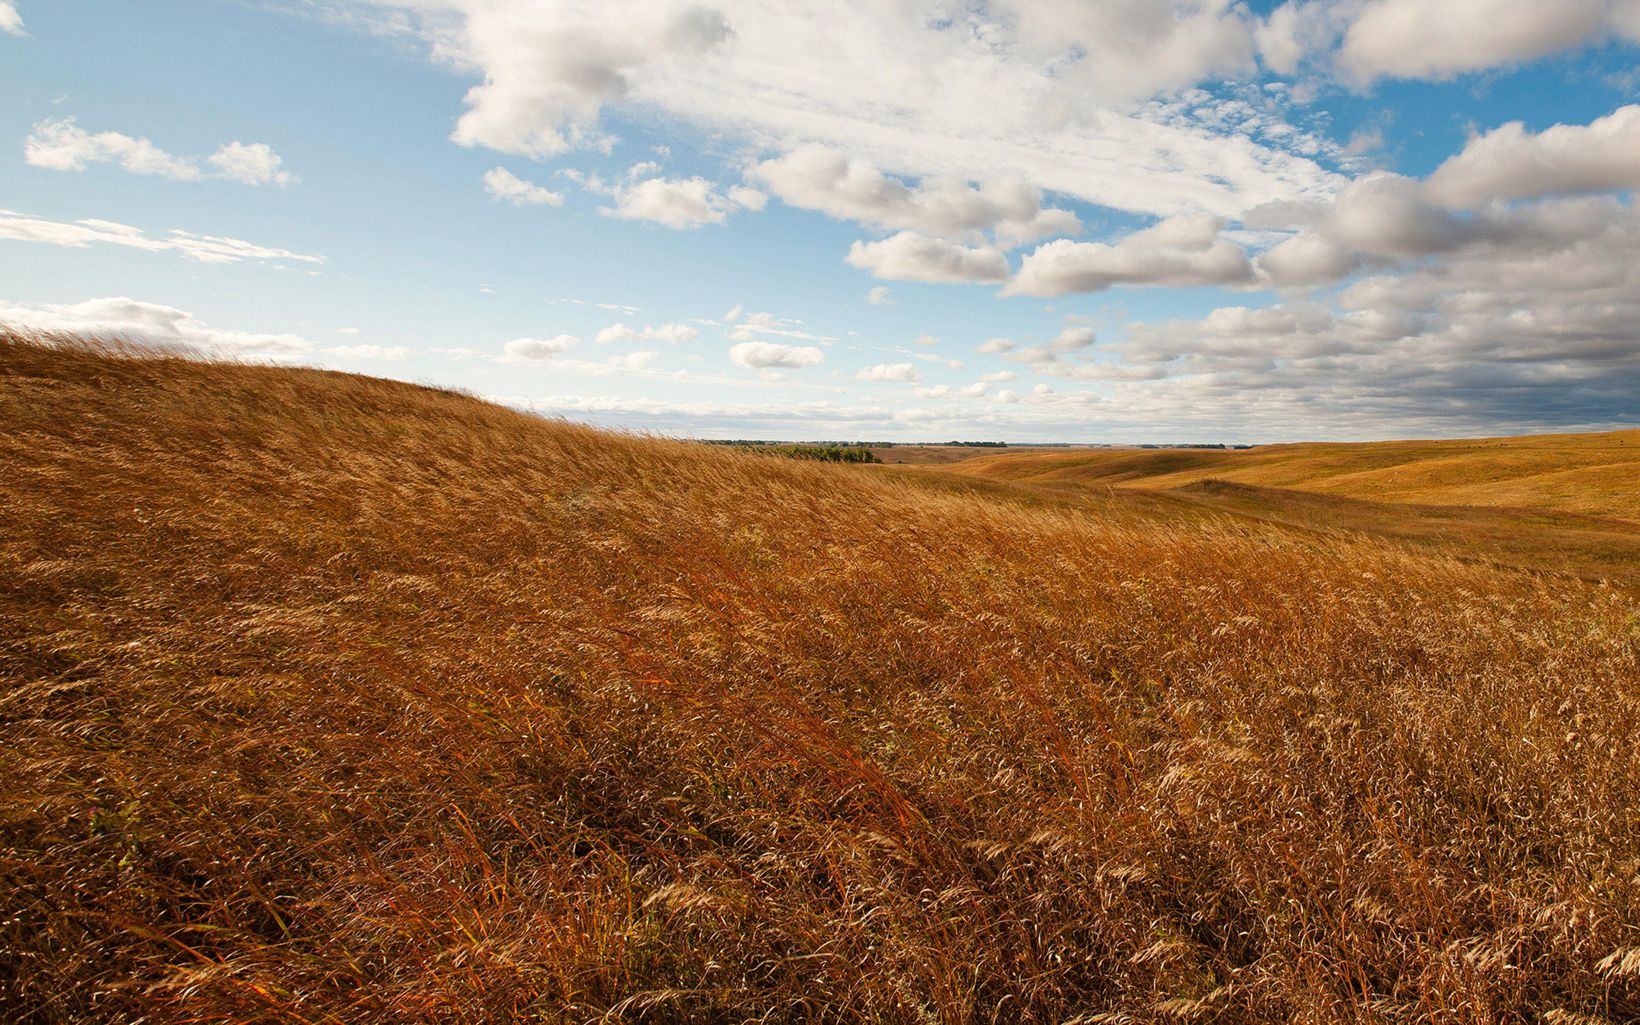 MANAGE FOR RESILIENCE We’re helping nature manage change through efforts such as using a greater diversity of native plants in prairie restoration © Richard Hamilton Smith